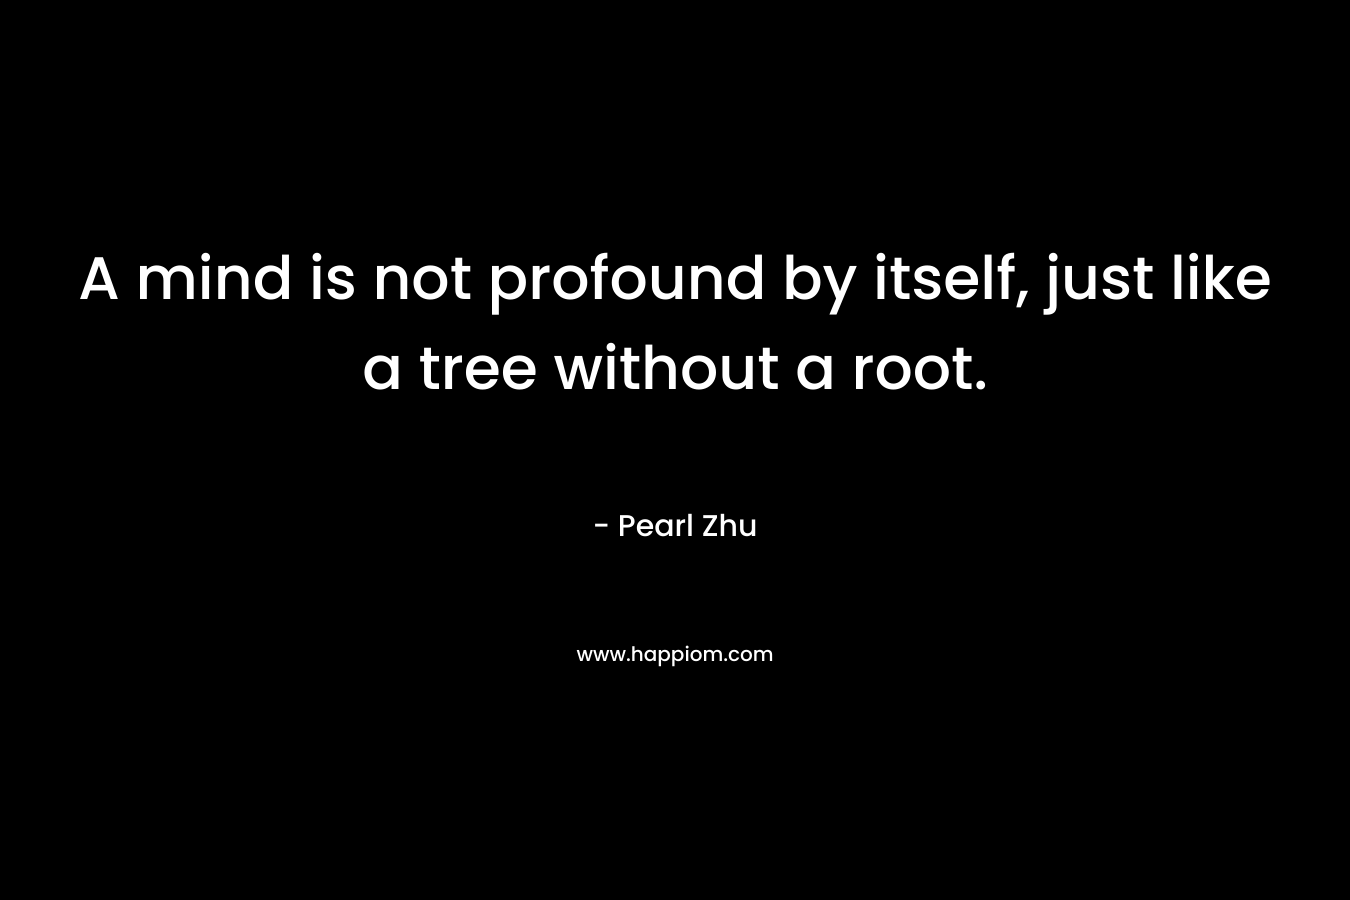 A mind is not profound by itself, just like a tree without a root.